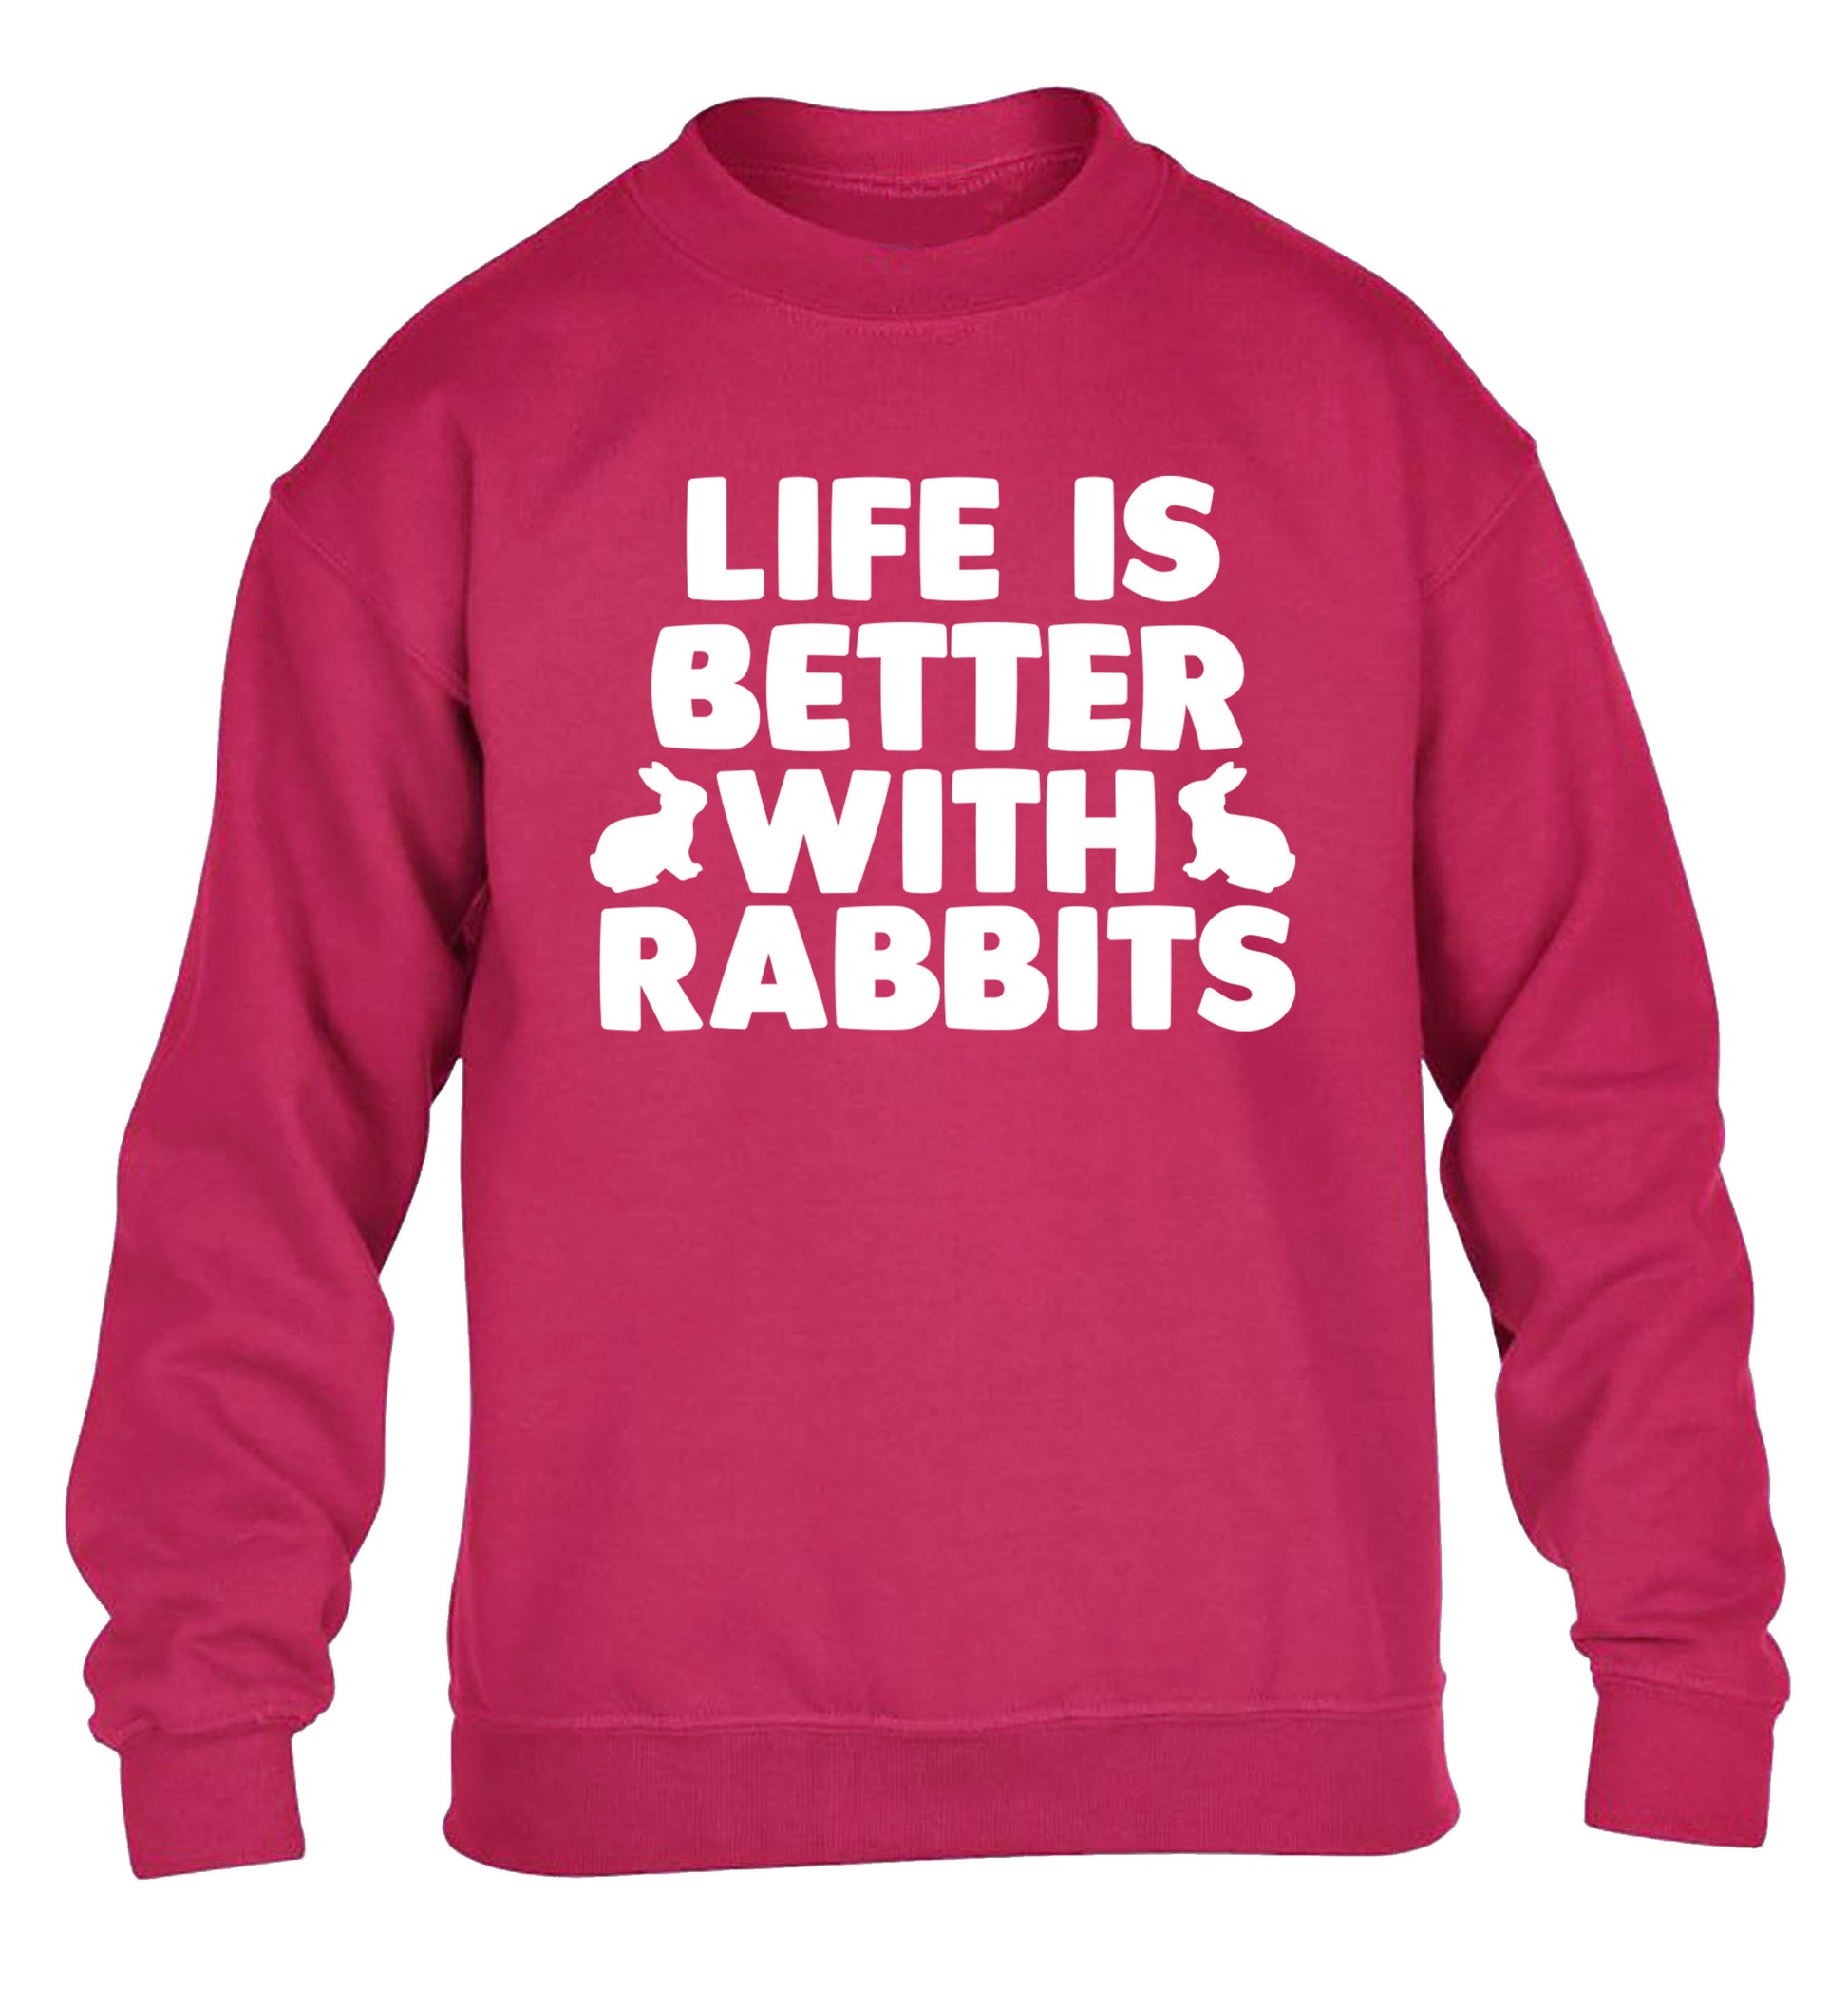 Life is better with rabbits children's pink  sweater 12-14 Years